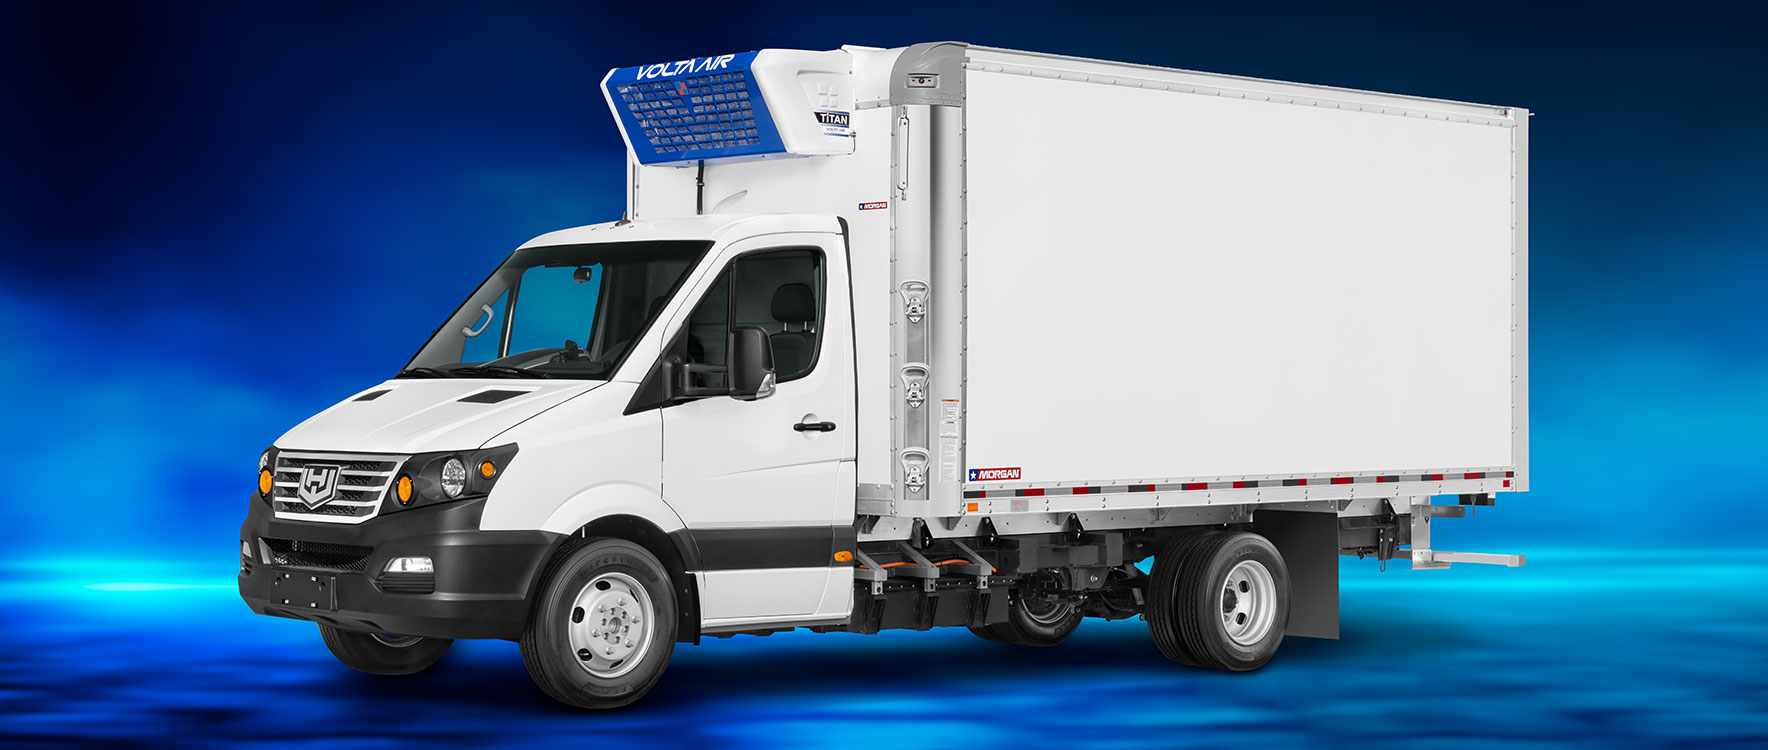 All-Electric Refrigerated Truck